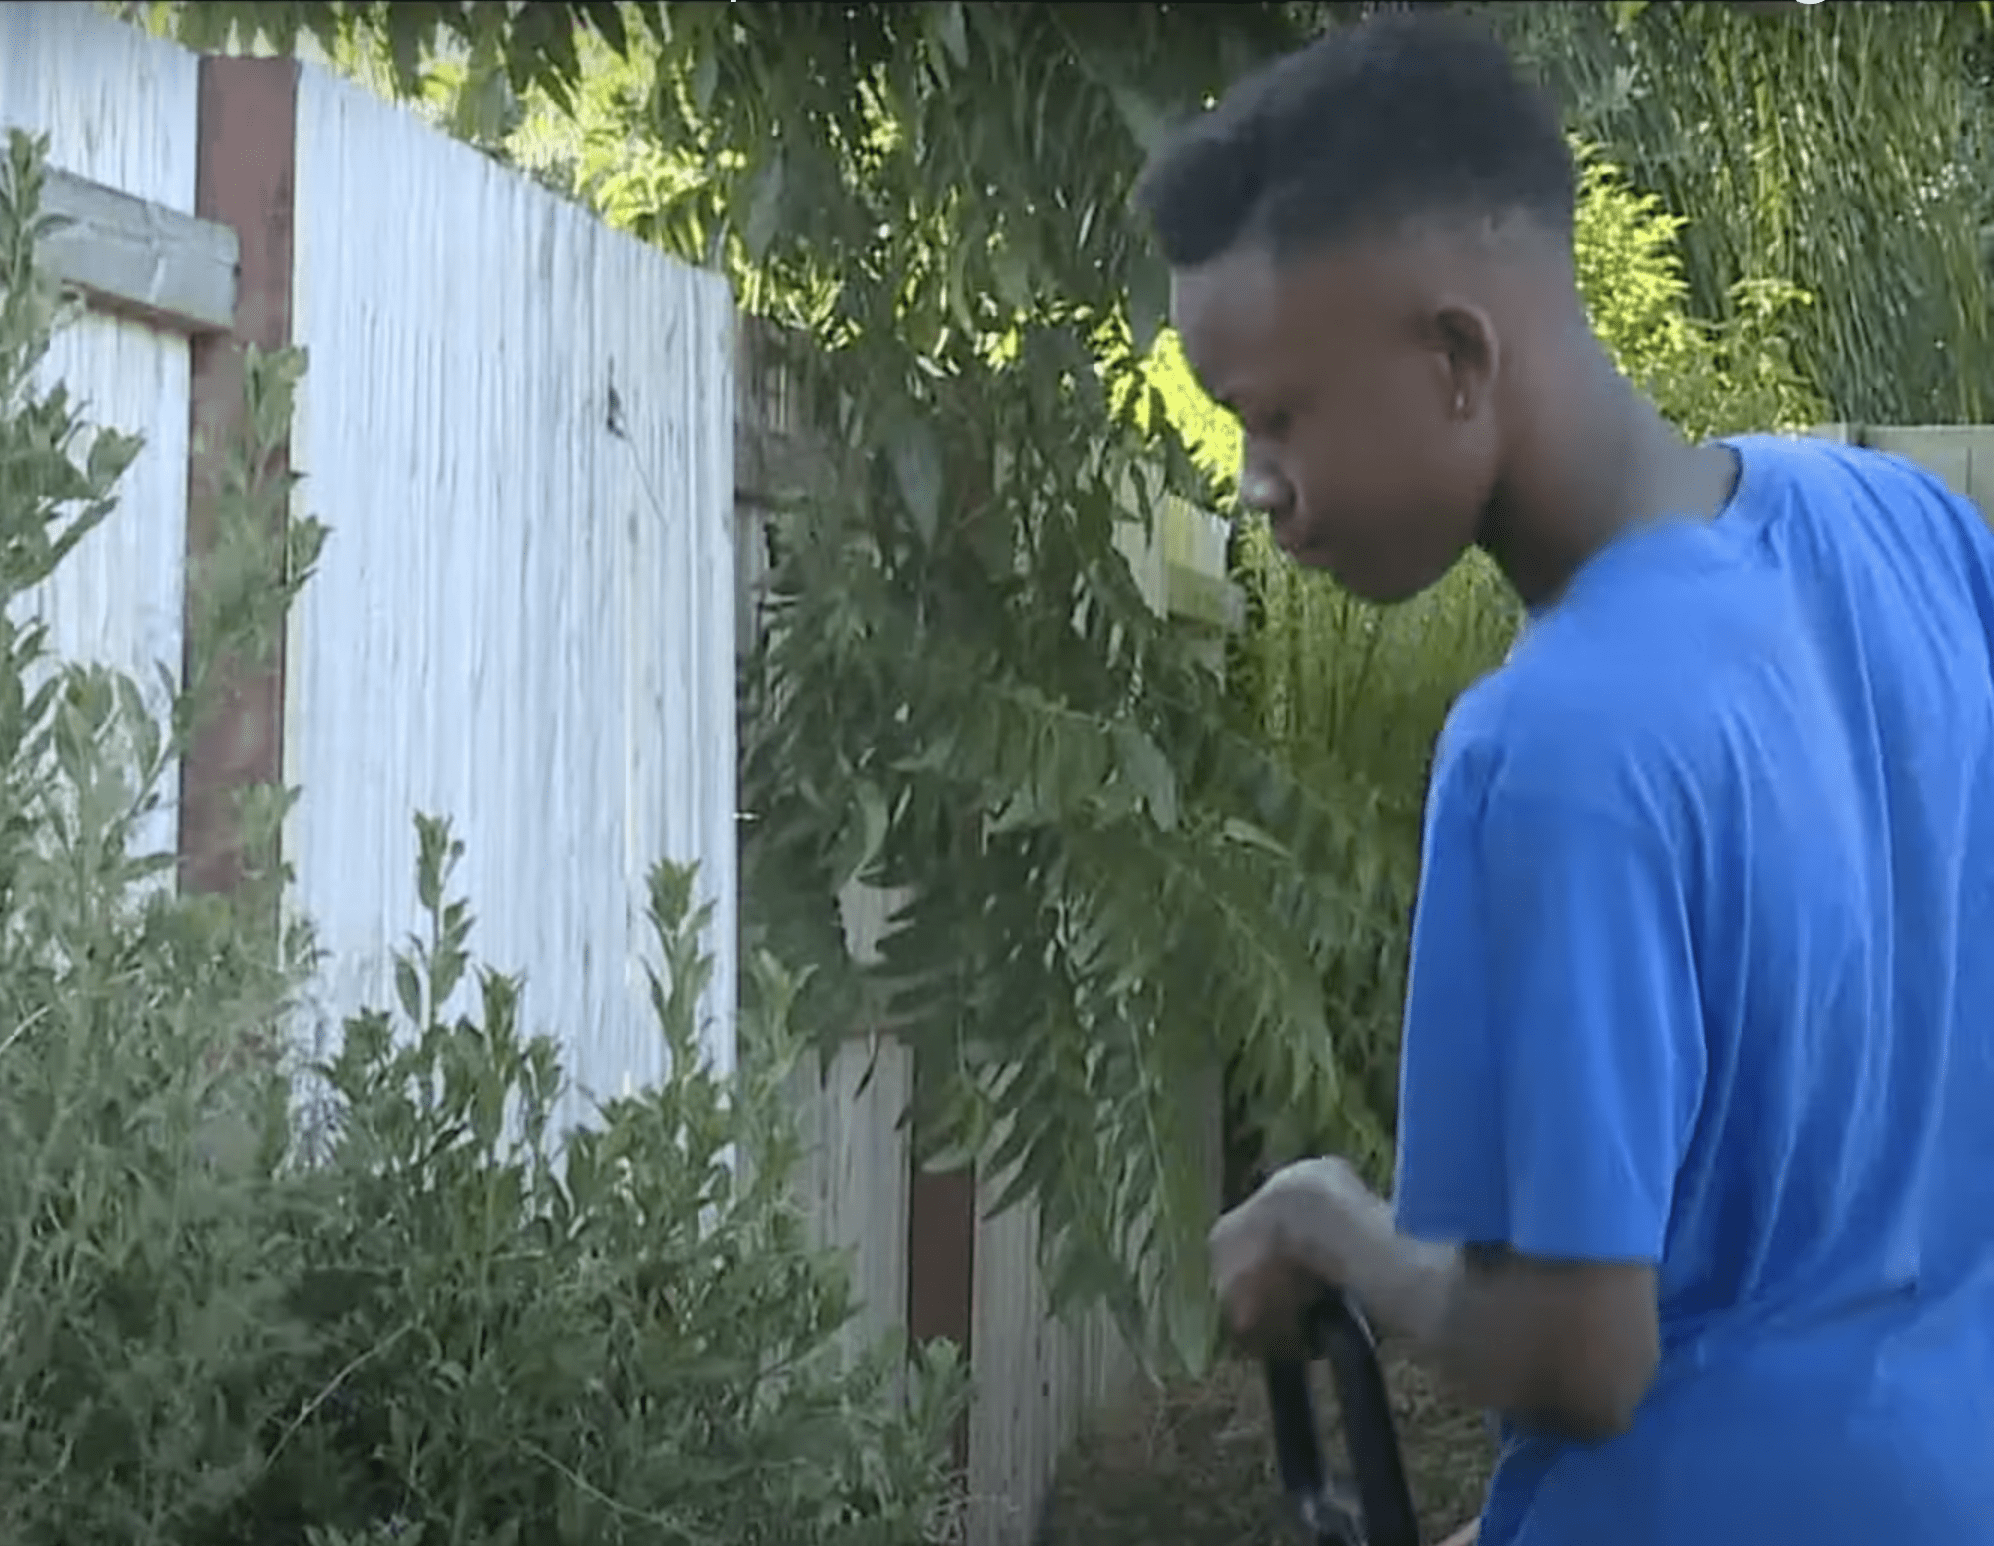 Johnson pictured mowing the lawn. | Source: youtube.com/FOX40 News